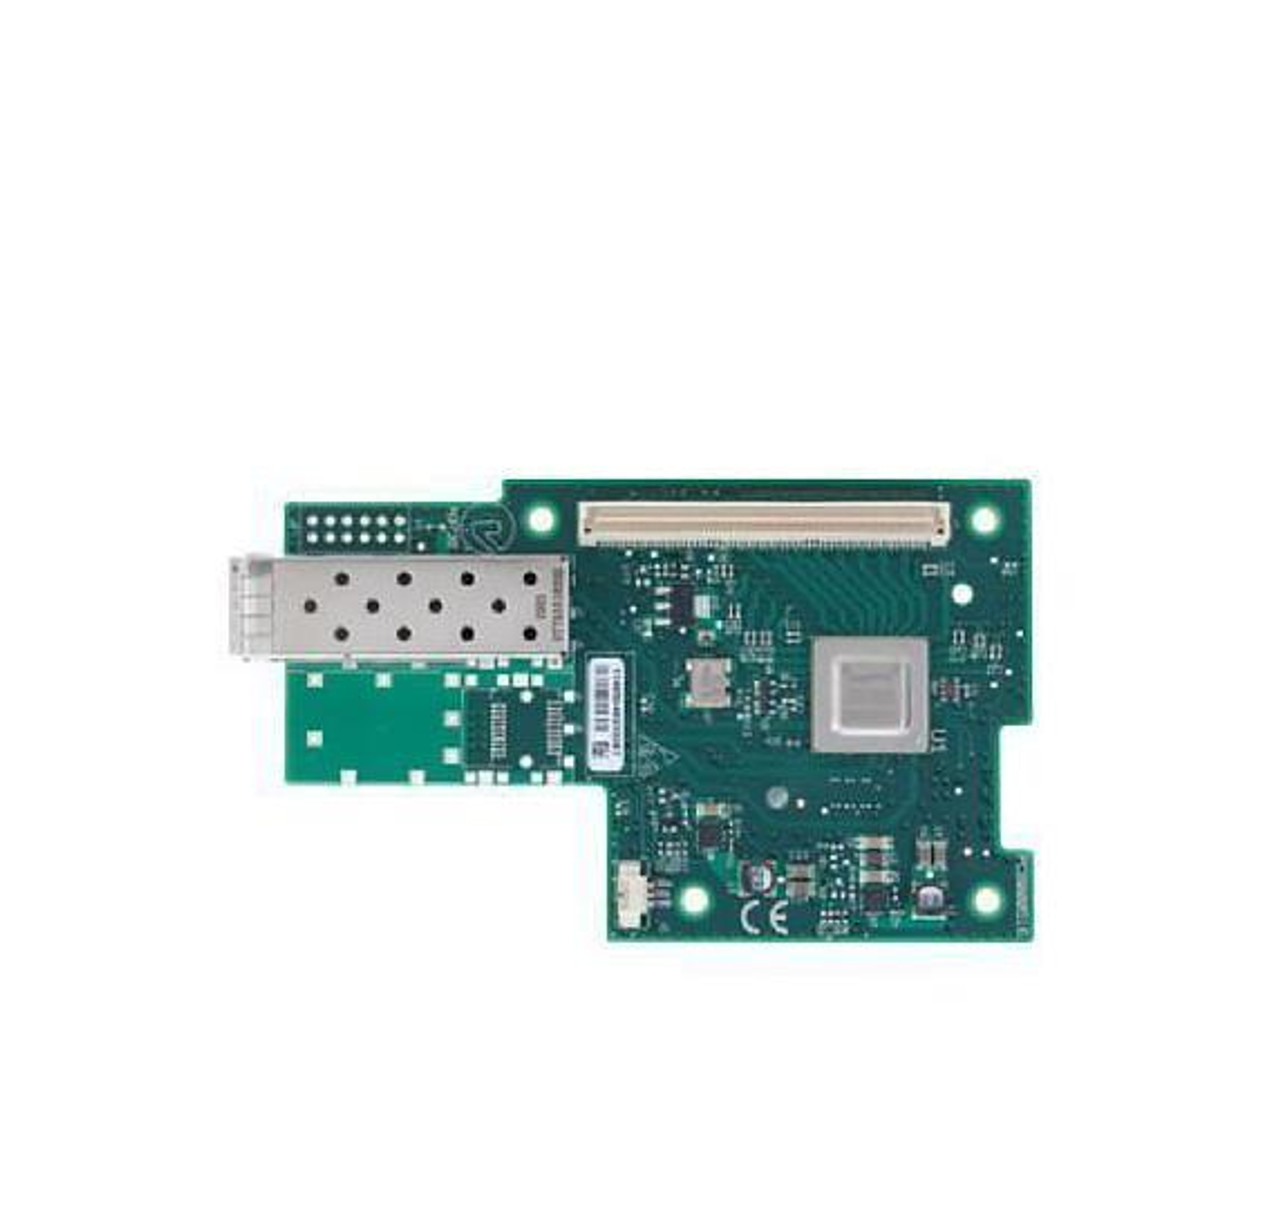 MCX345A-FCPN Mellanox Connectx -3 Pro Vpi Network Interface Card For Ocp, Fdr And 40/56gbe Single-Port Qsfp, Pcie3.0 X8, No Bracket, Rohs R6